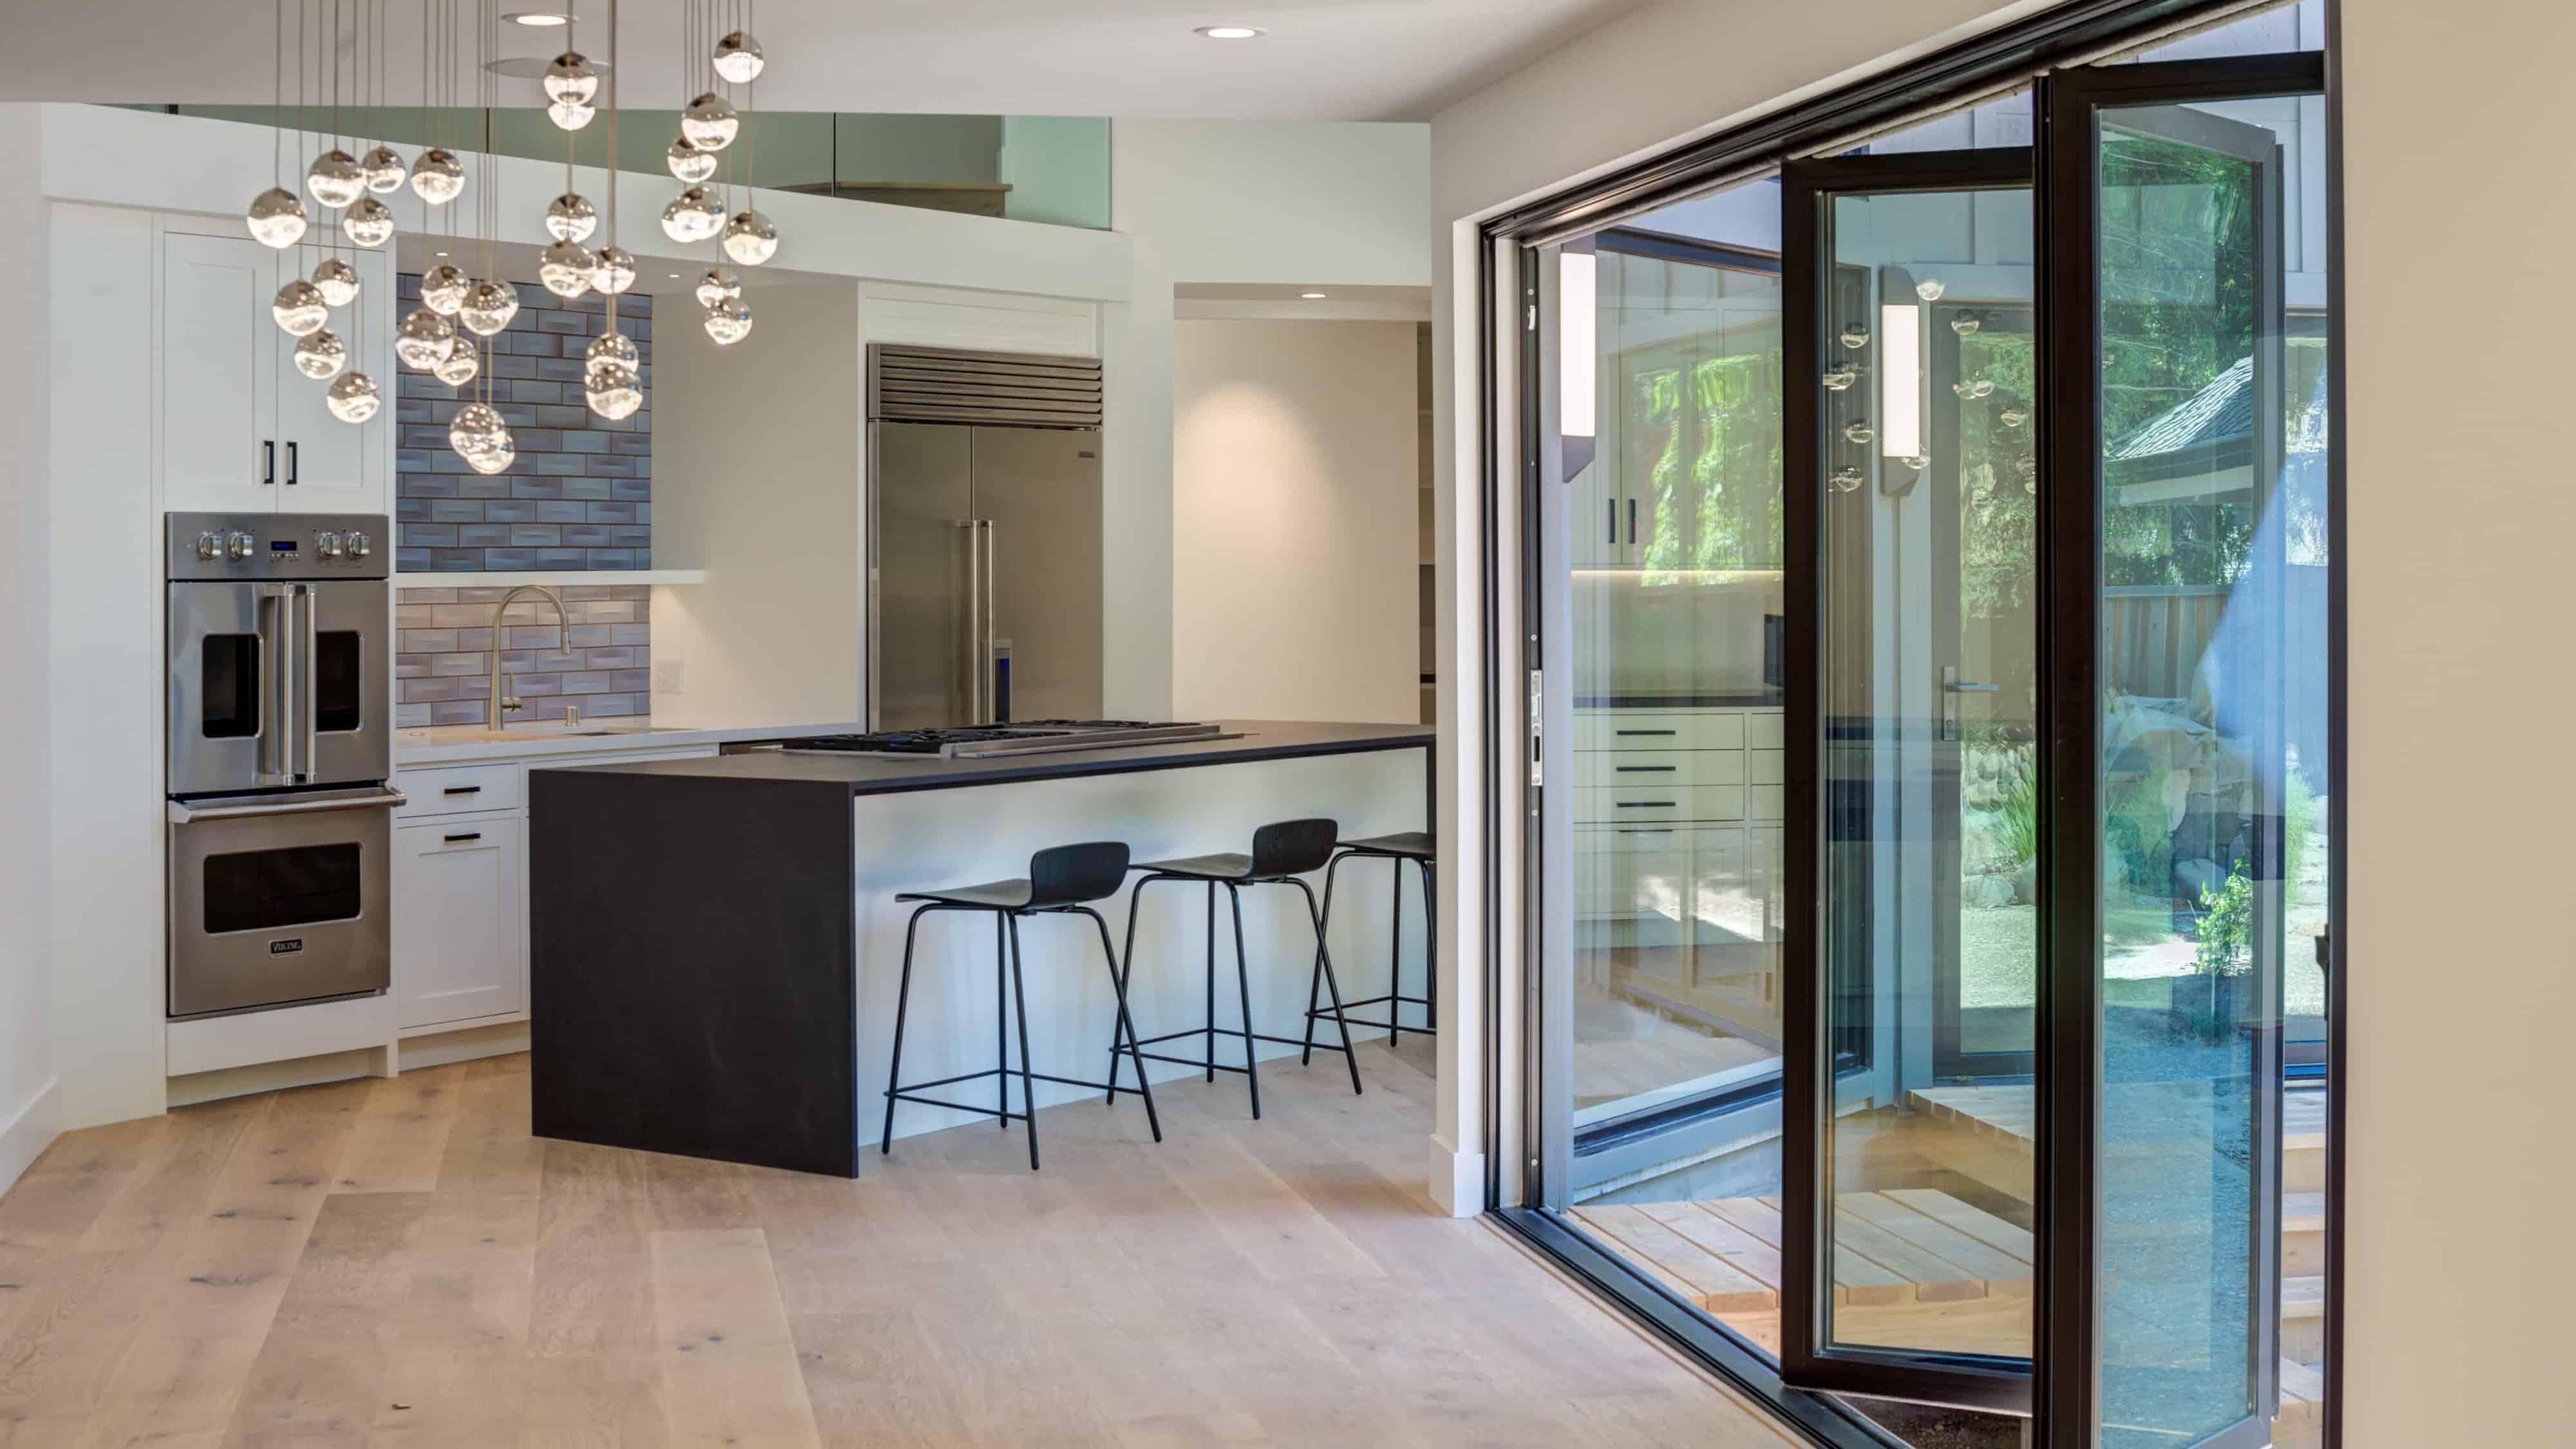 Interior view of sleek modern home with kitchen and large glass doors to the exterior.